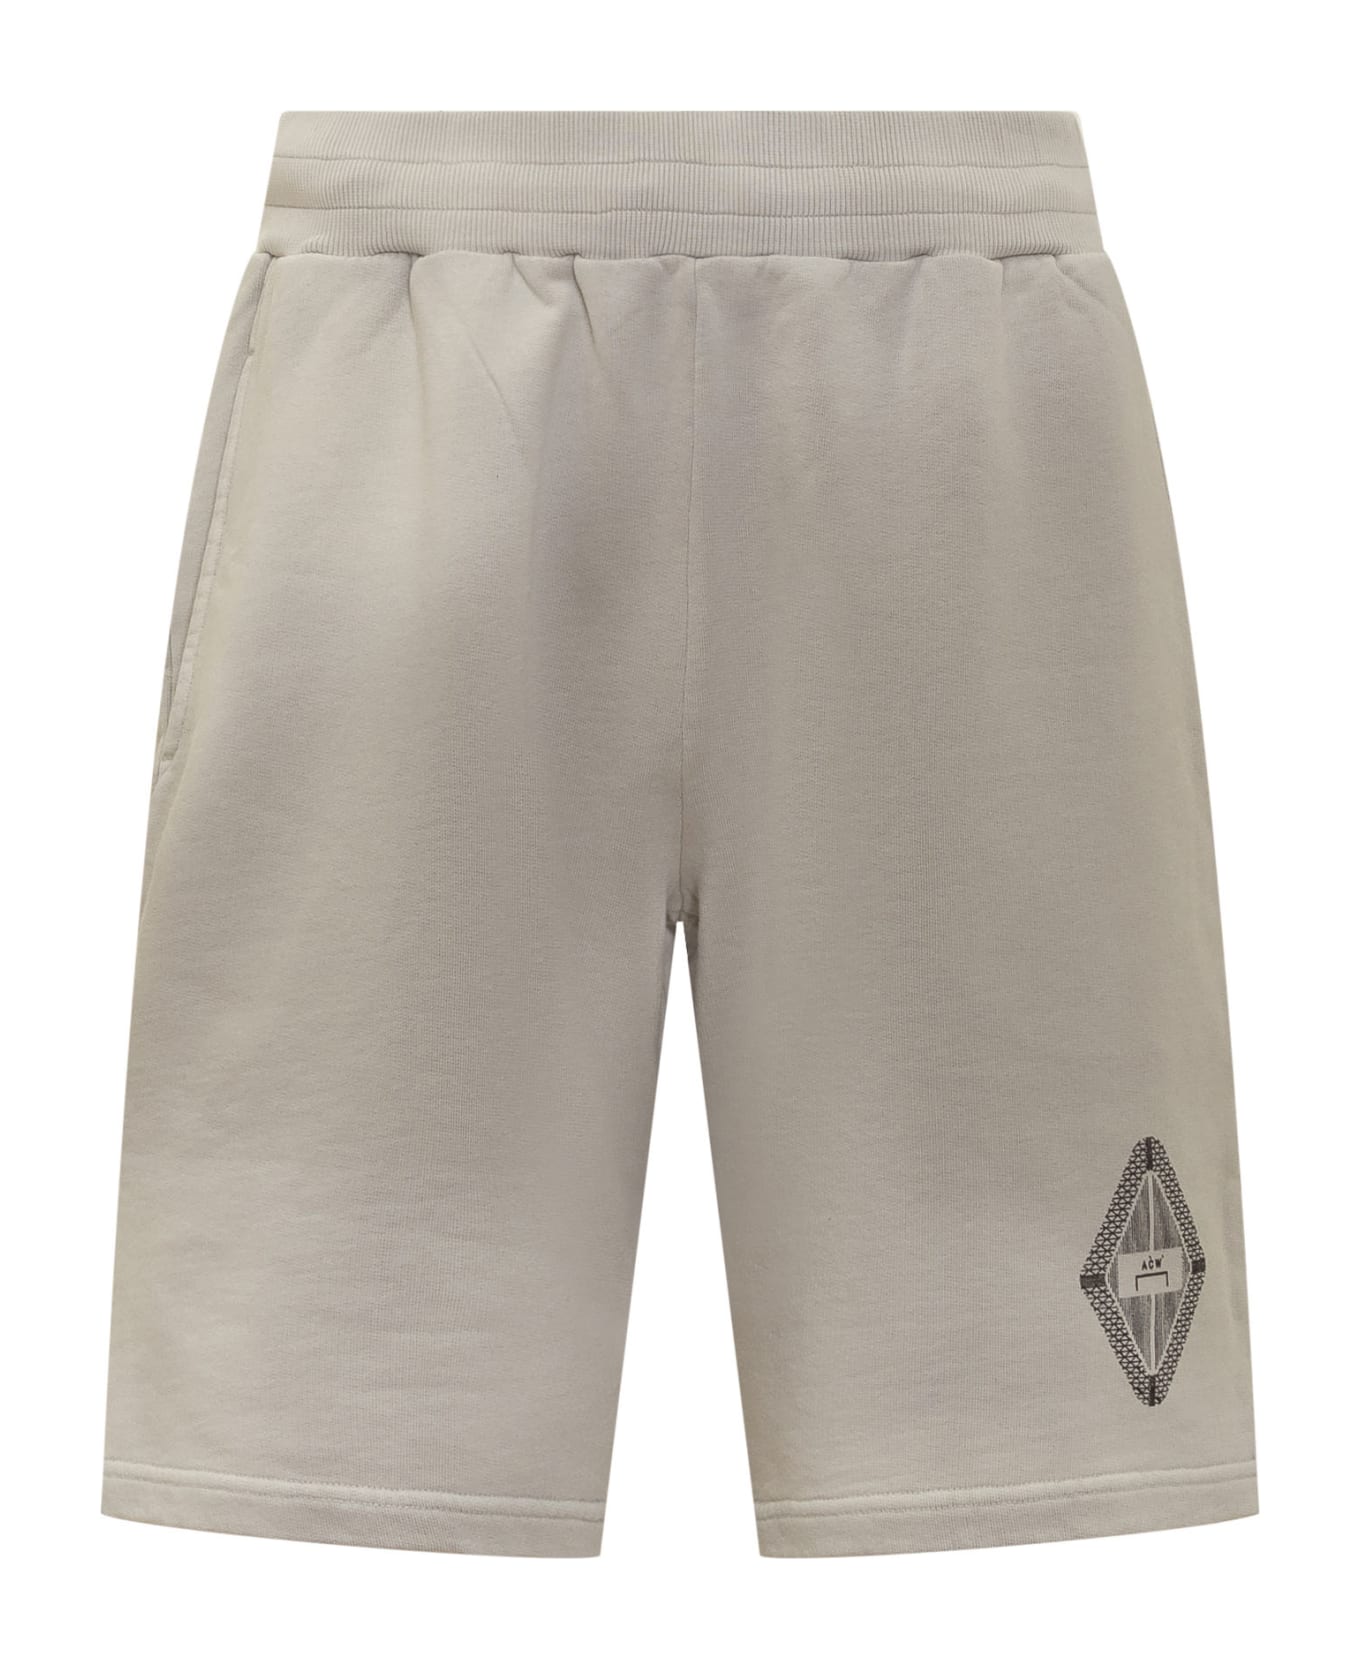 A-COLD-WALL Gradient Jersey Shorts - LIGHT GREY